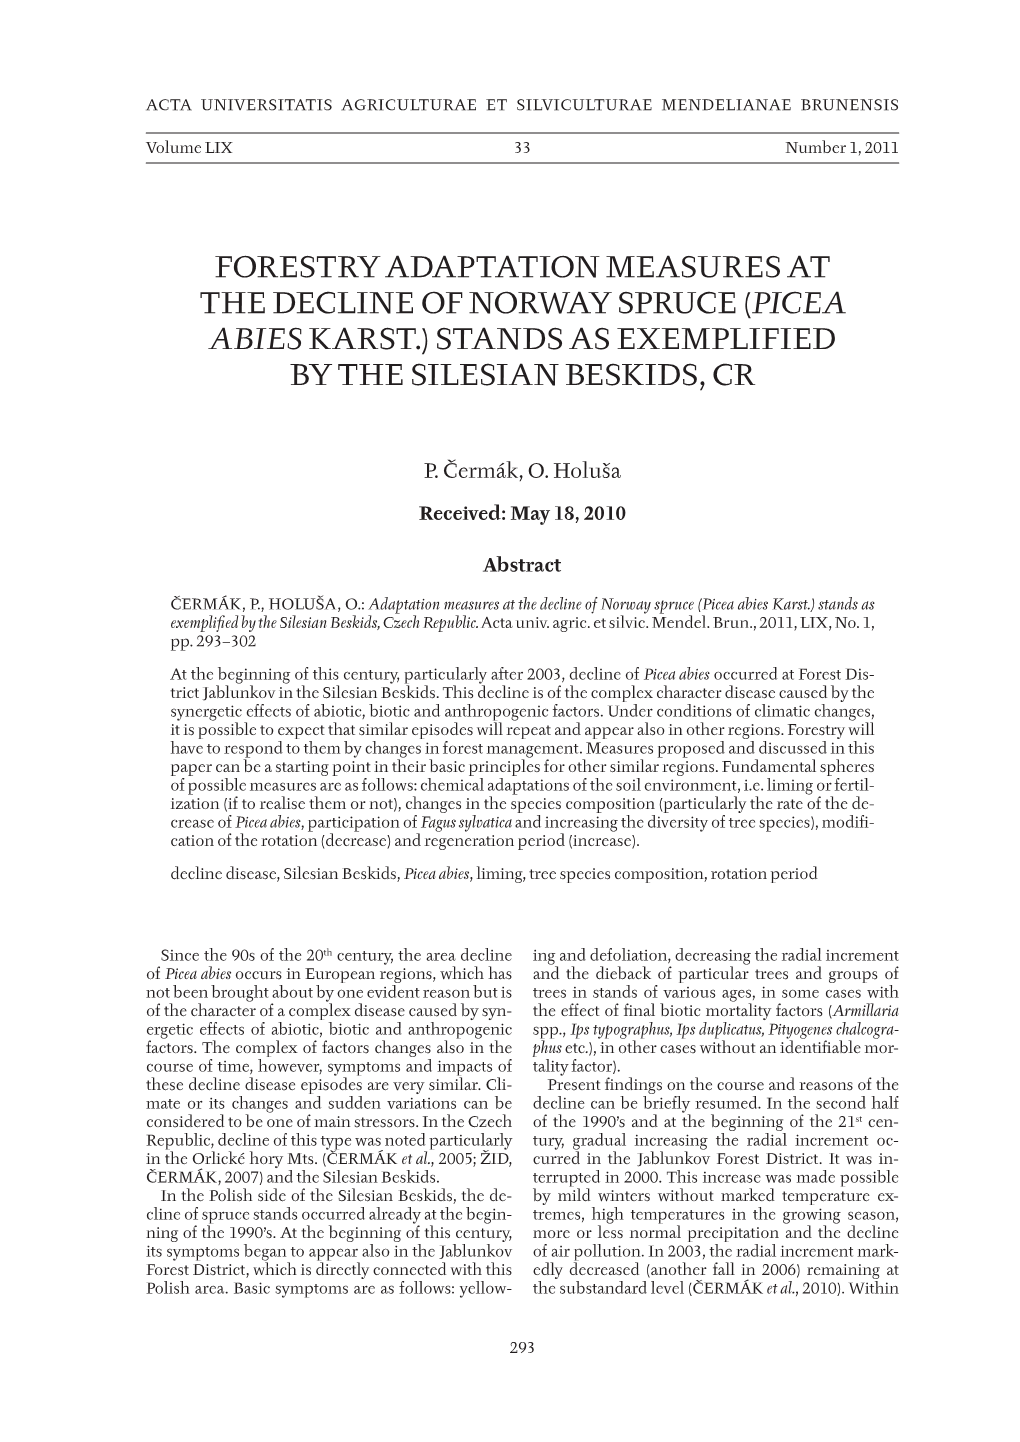 Forestry Adaptation Measures at the Decline of Norway Spruce (Picea Abies Karst.) Stands As Exemplified by the Silesian Beskids, Cr